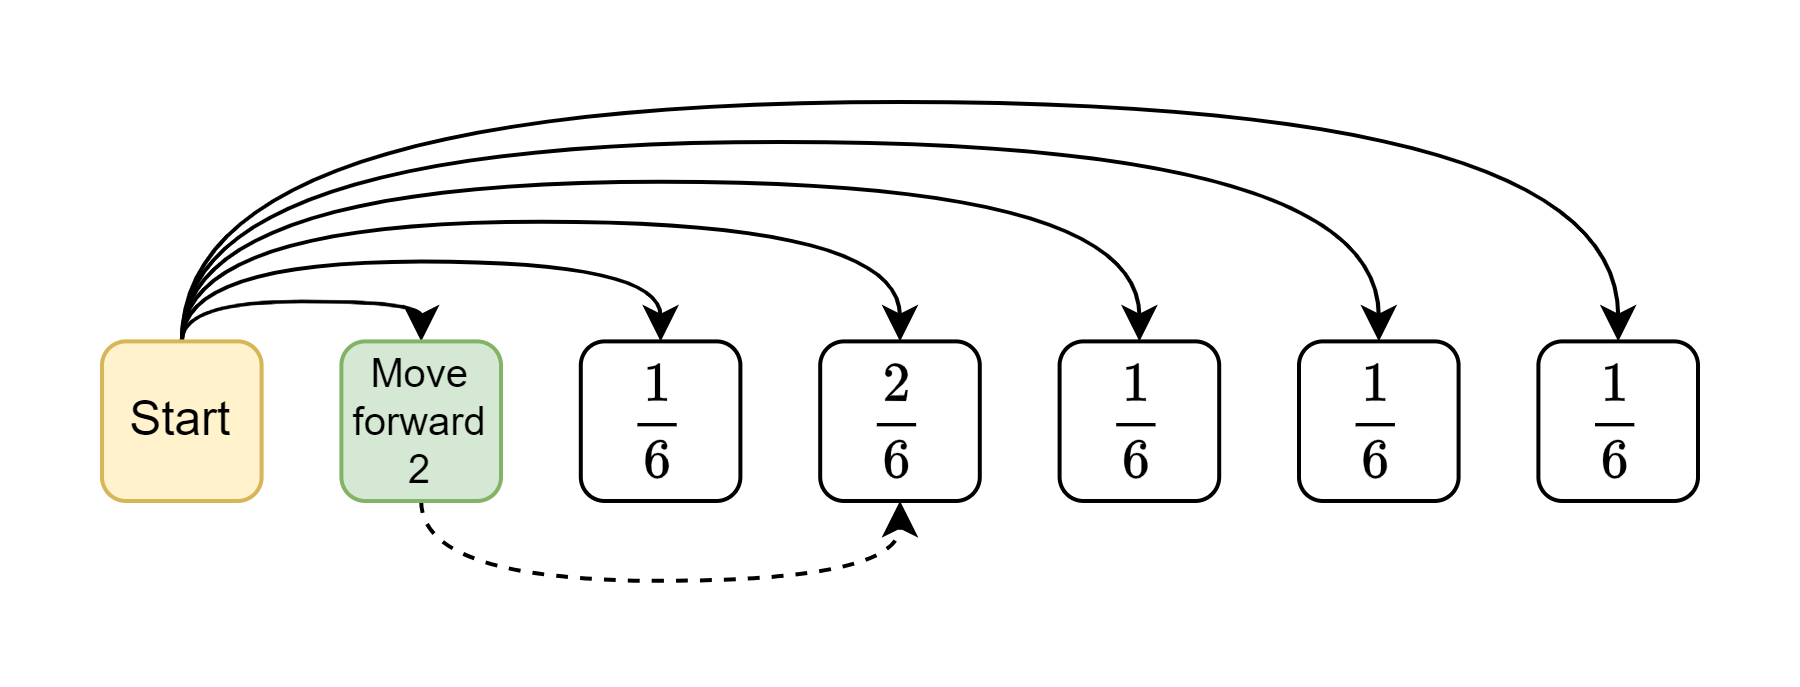 Diagram of the possibilities for the first move